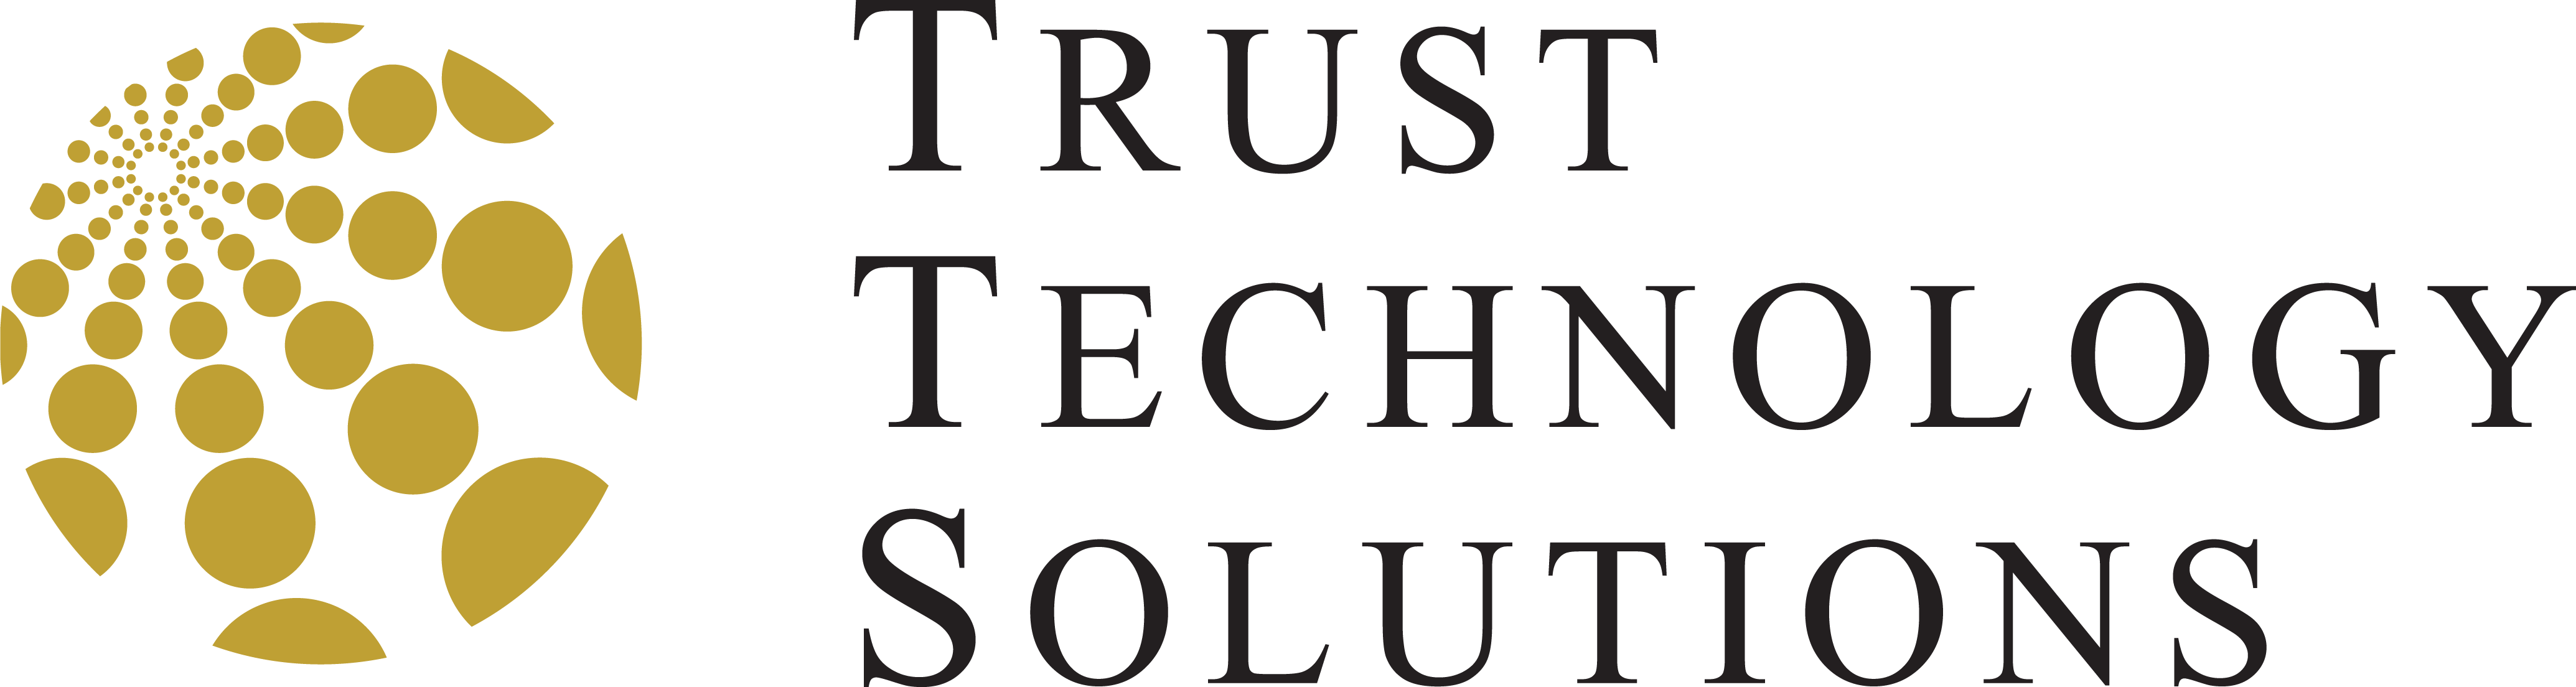 Trust Technology Solutions